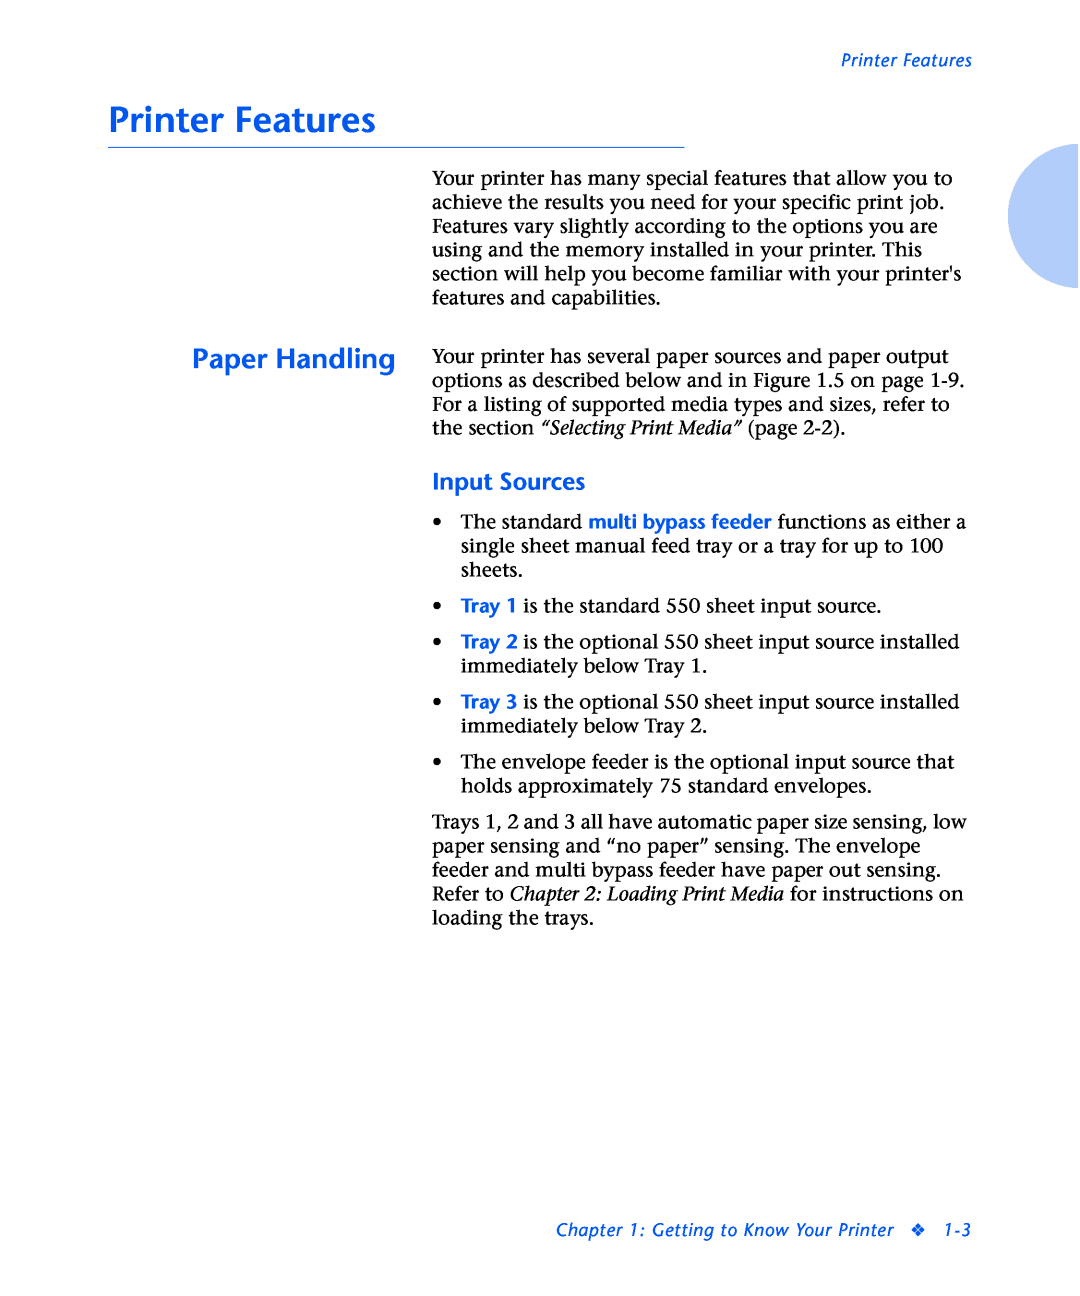 Xerox N2125 manual Printer Features, Paper Handling, Input Sources, the section “Selecting Print Media” page 2 